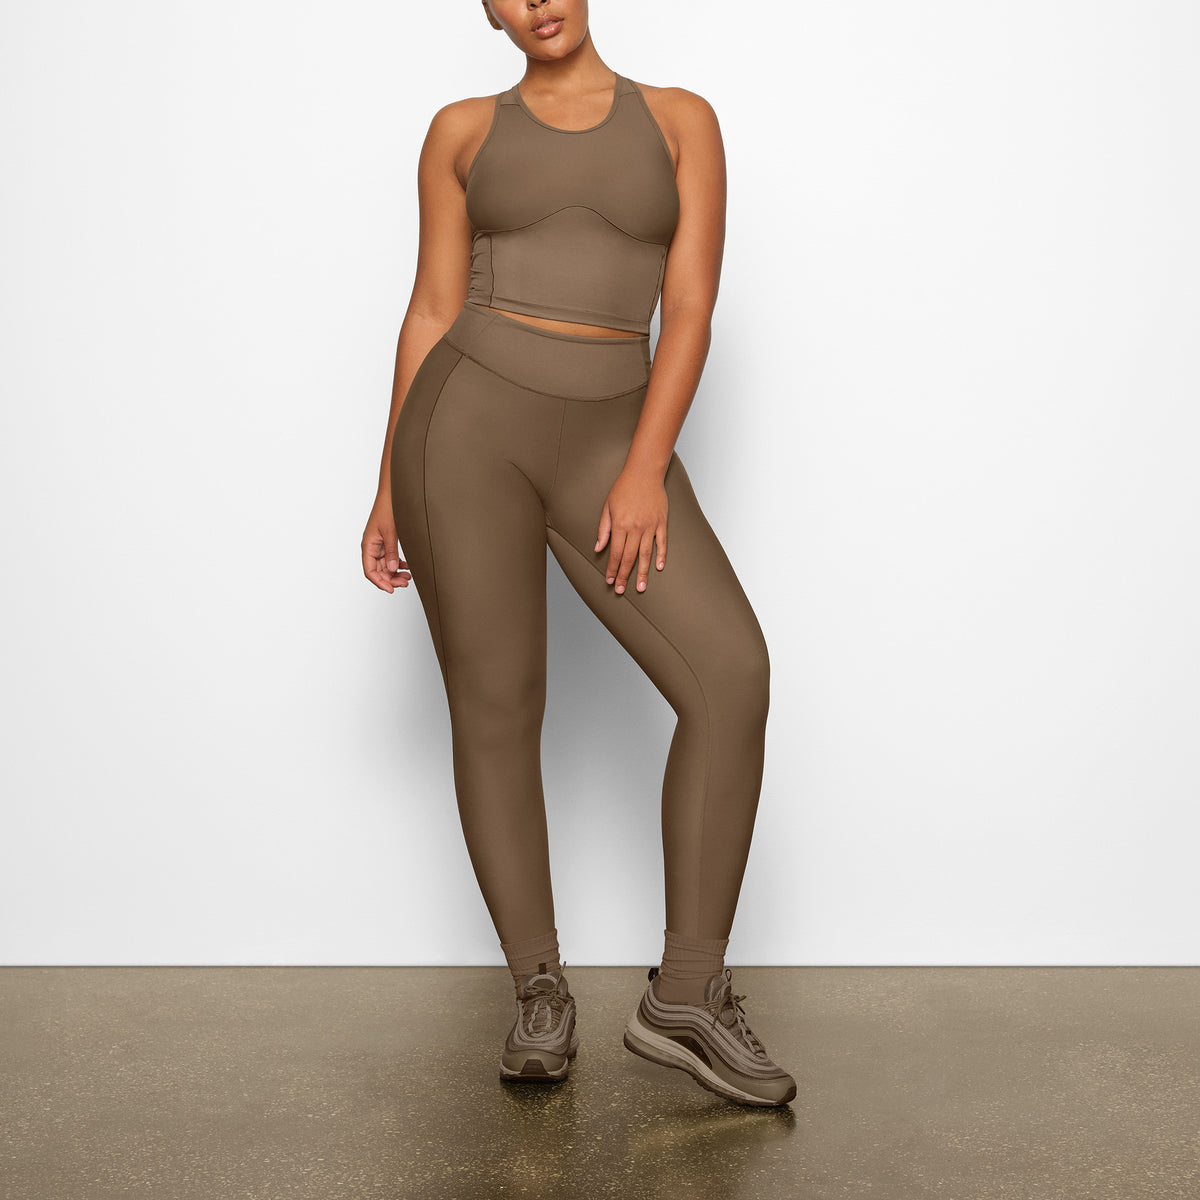 SKIMS: Just Dropped: The Soft Smoothing Legging